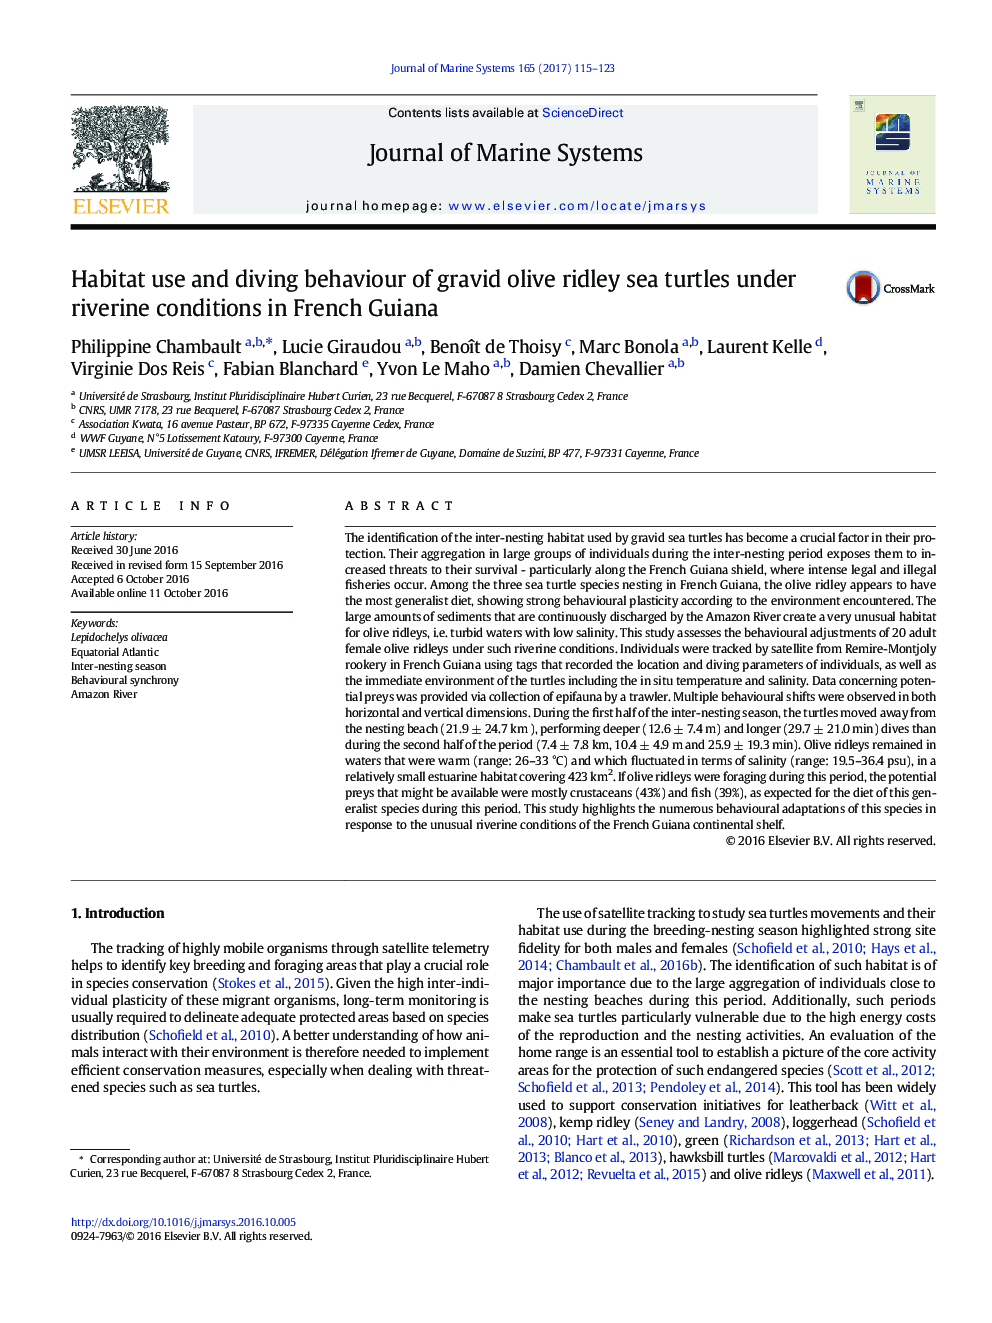 Habitat use and diving behaviour of gravid olive ridley sea turtles under riverine conditions in French Guiana